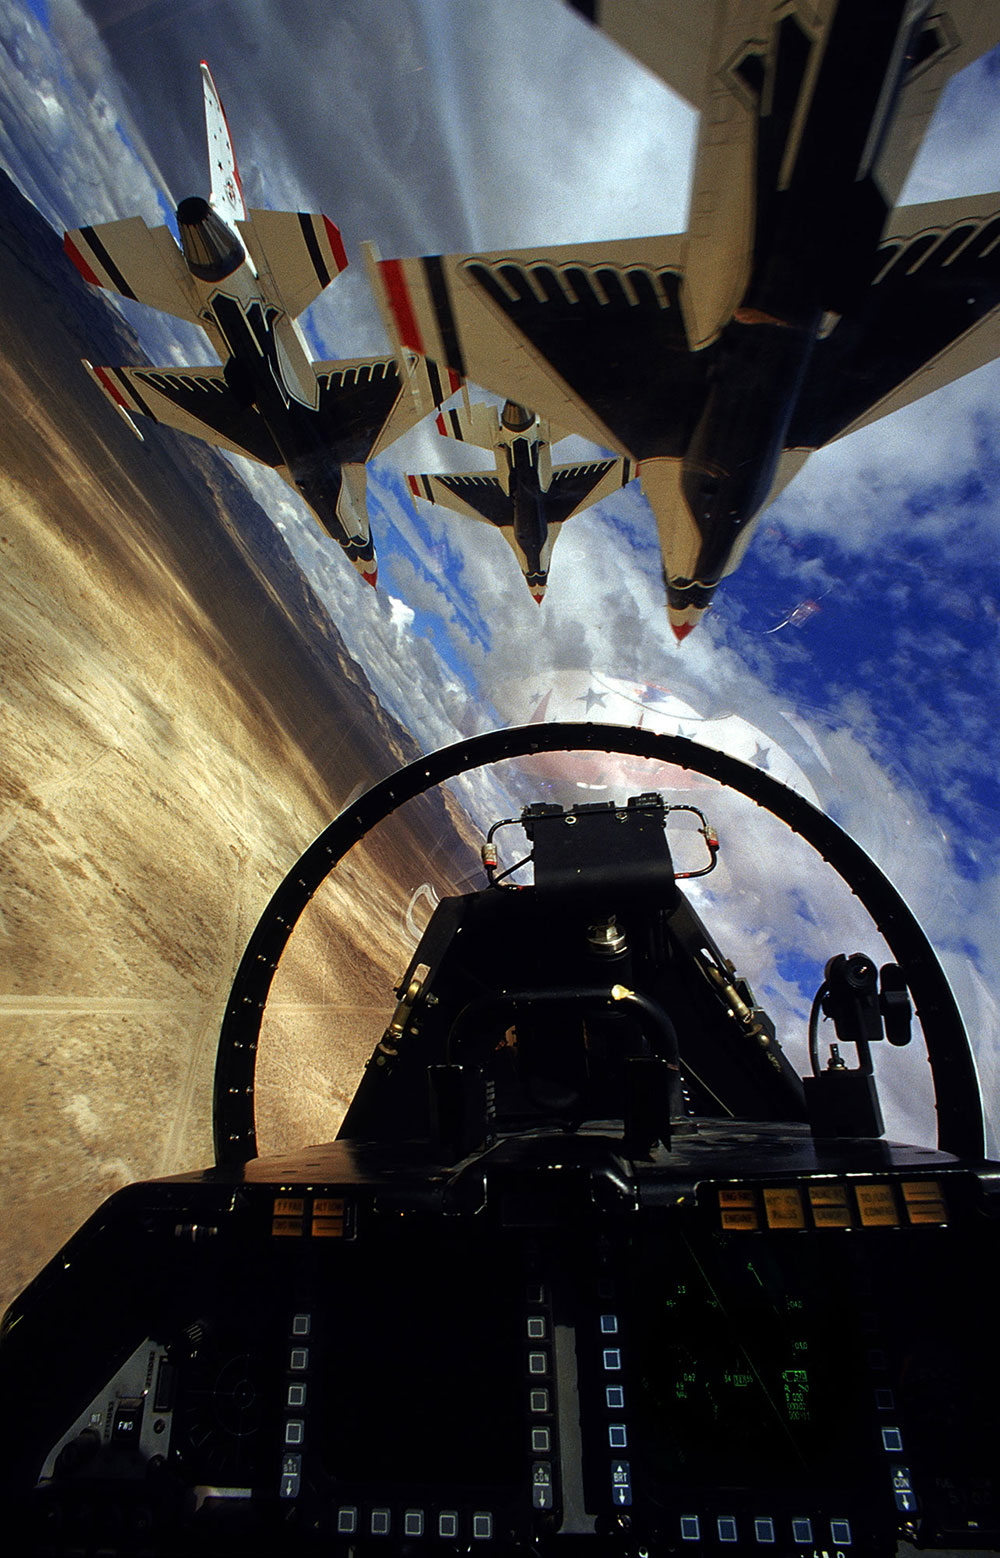 View from the cockpit of an F-16, while flying in formation. This is the widely known aerobatics team known as the Thunderbirds.